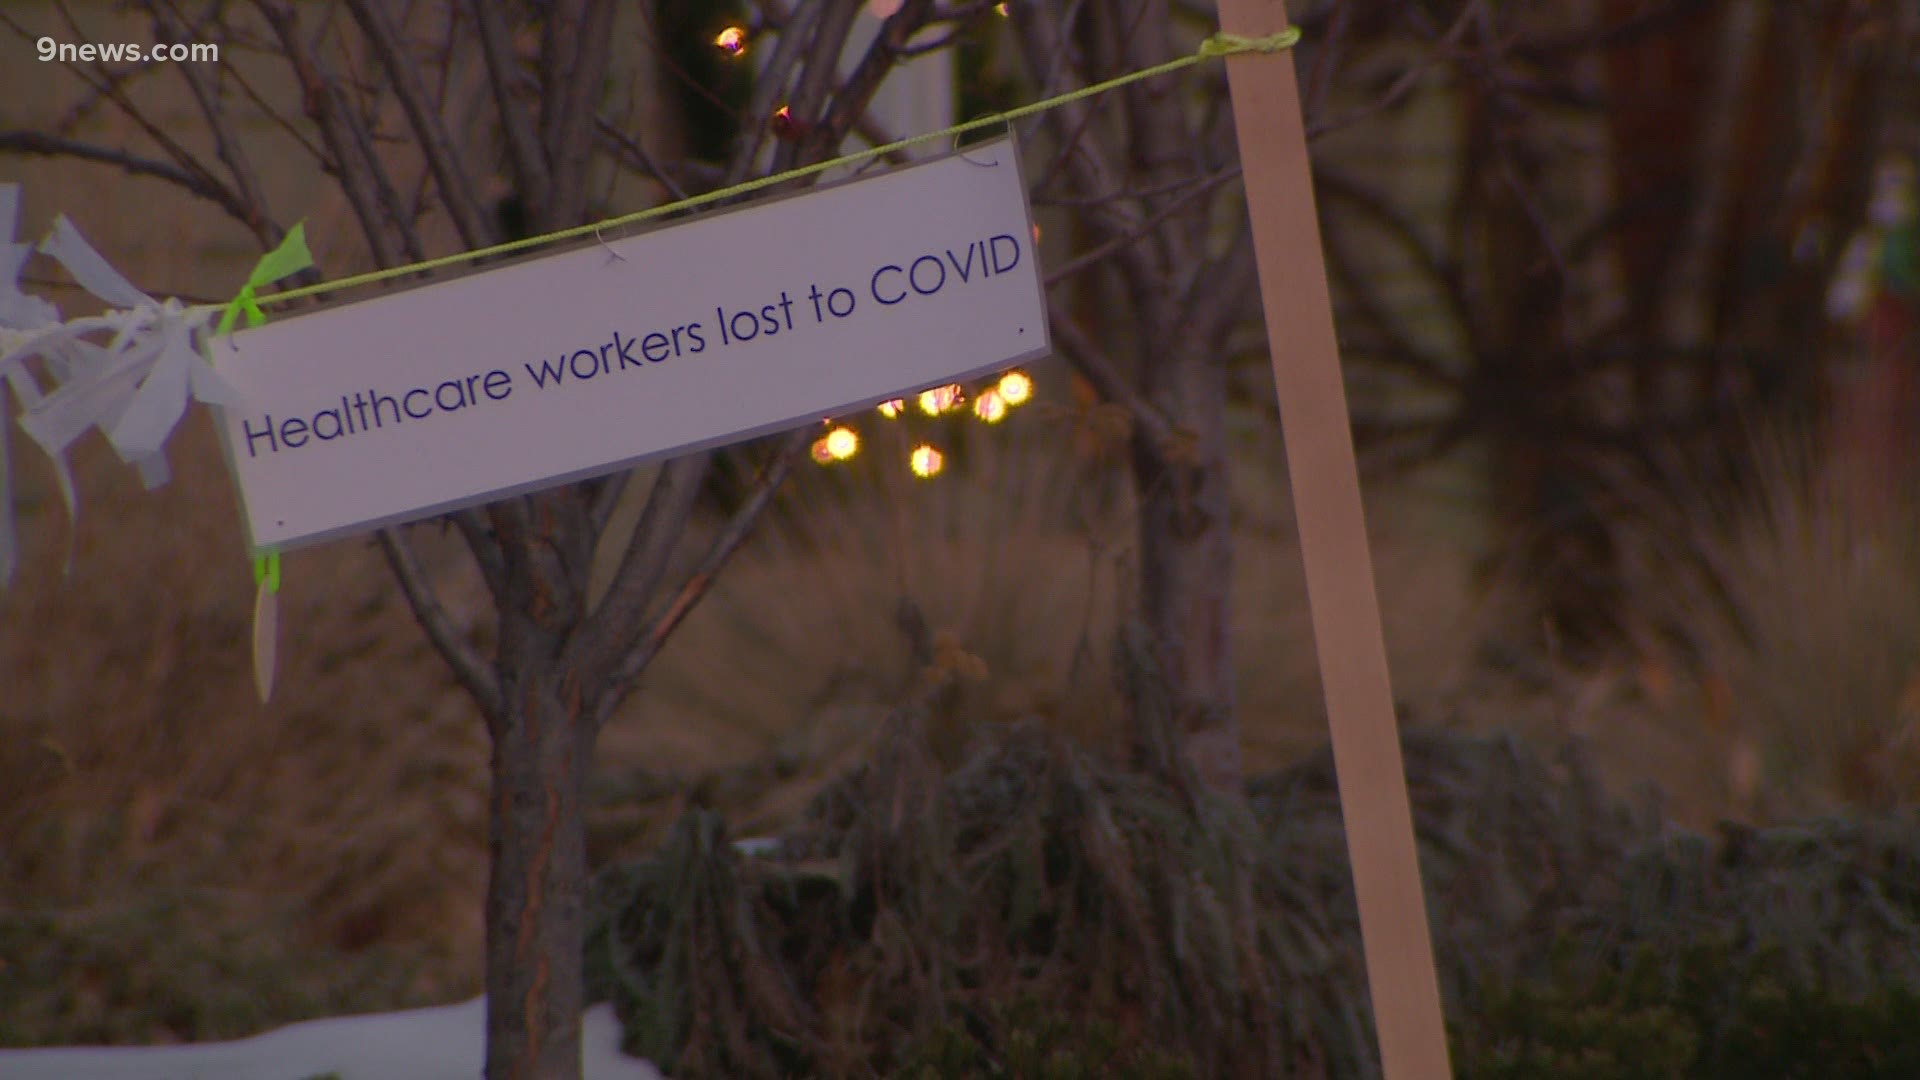 Dr. Karyl Ting of Fort Collins said she wanted to help people visualize how many people have died from the virus.